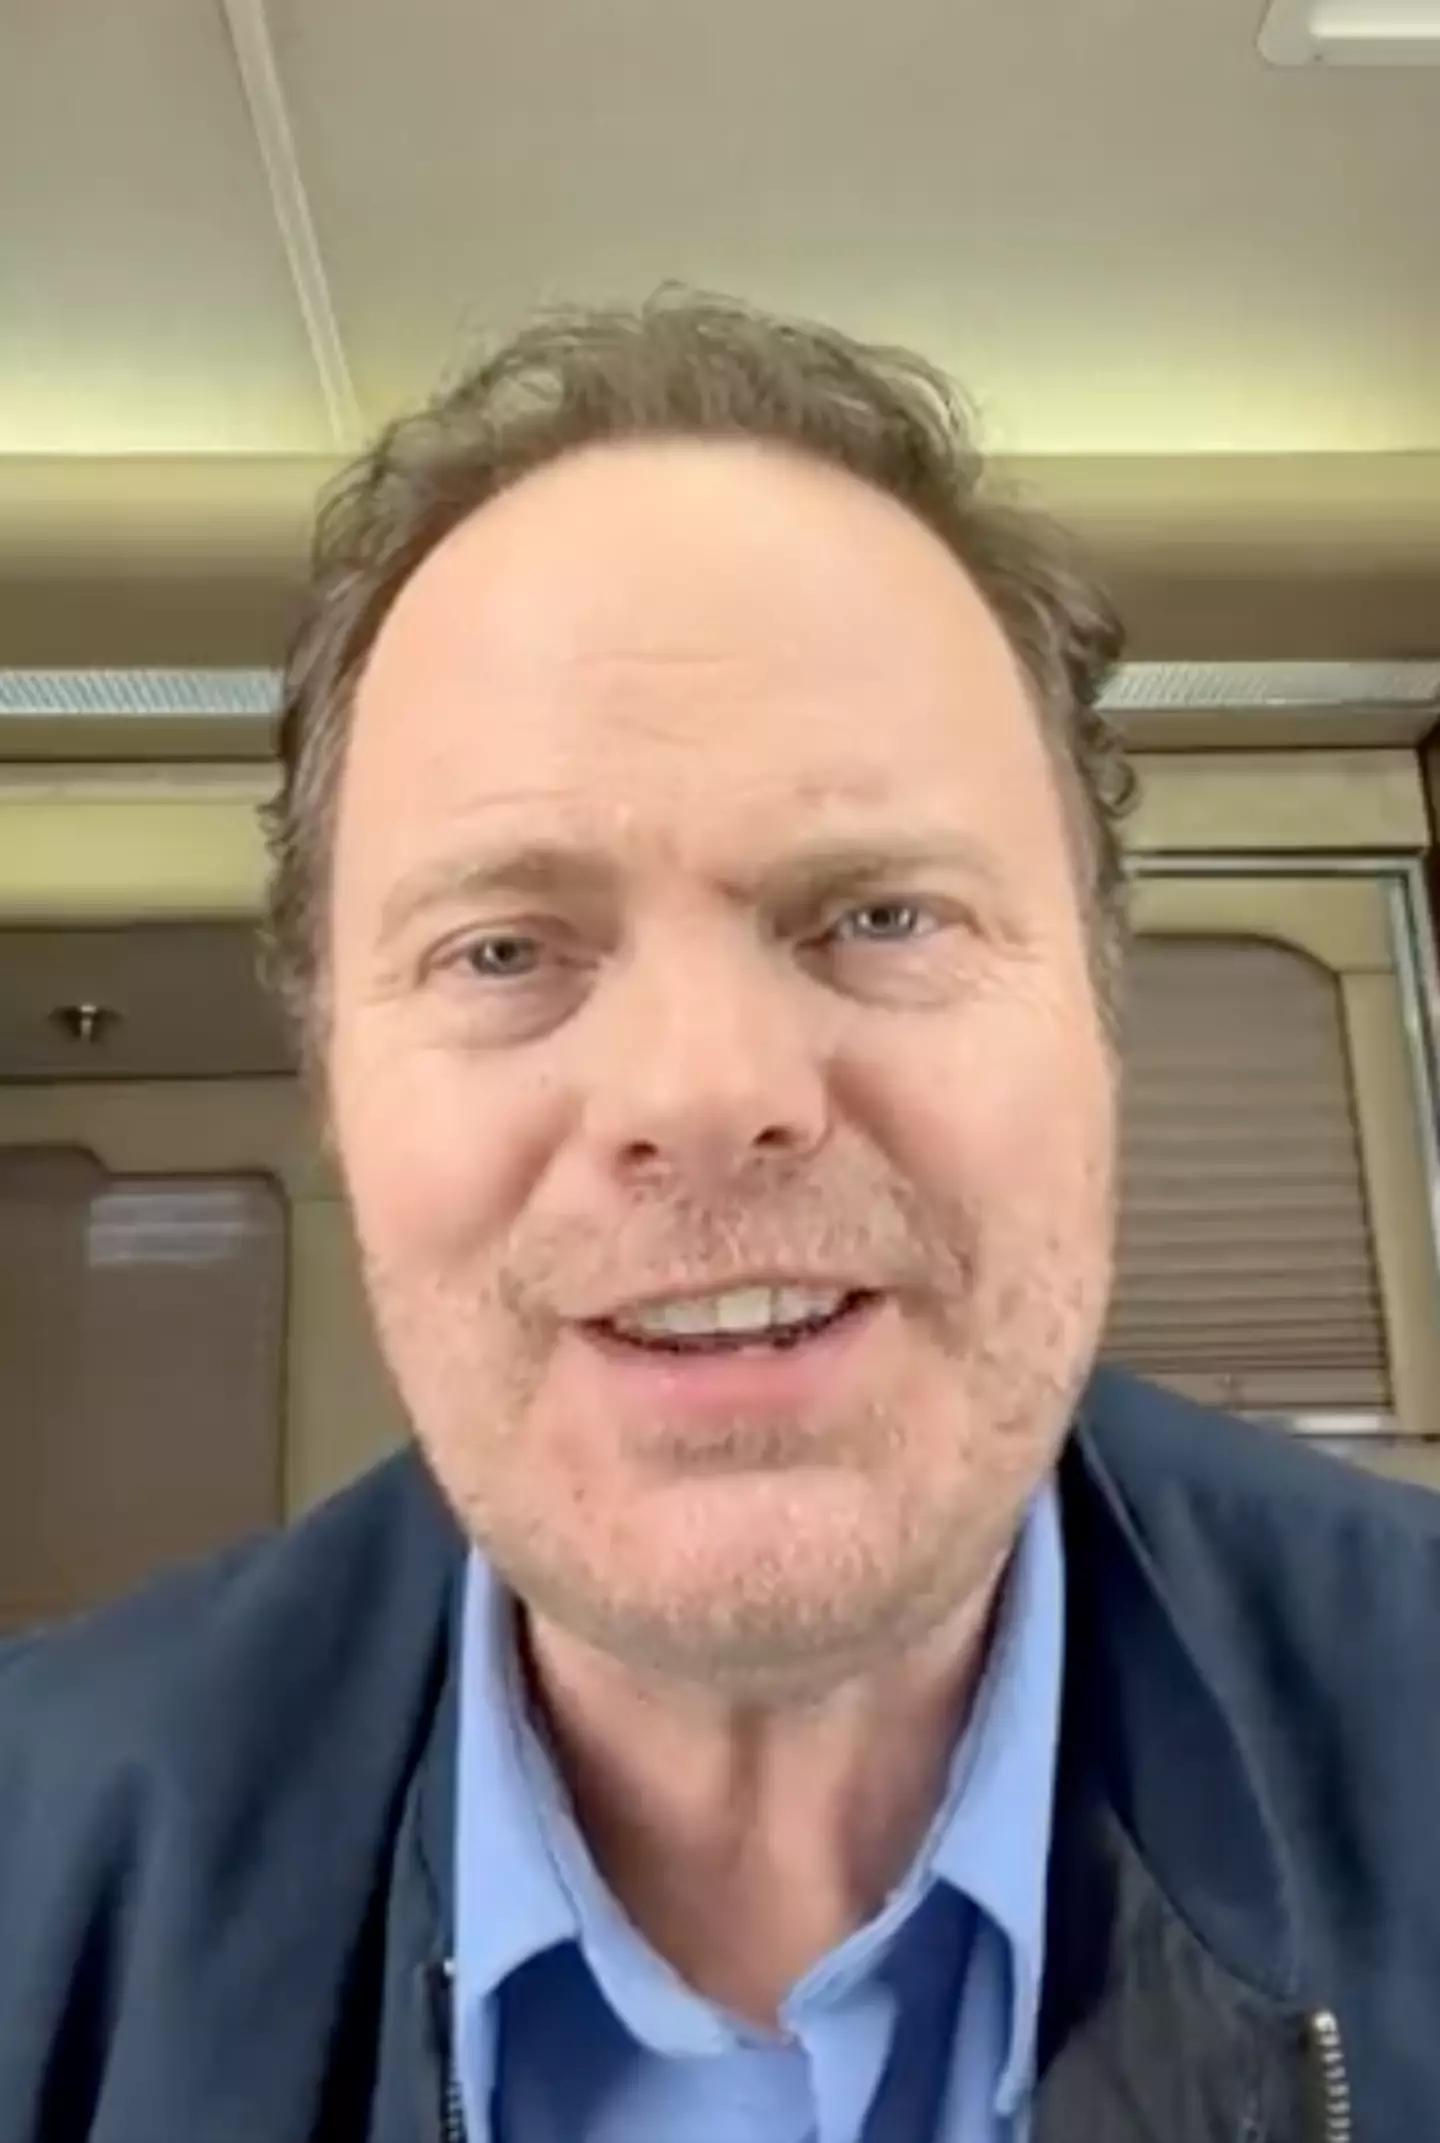 Rainn Wilson thinks there's 'an anti-Christian bias in Hollywood' after watching the latest episode of The Last of Us.